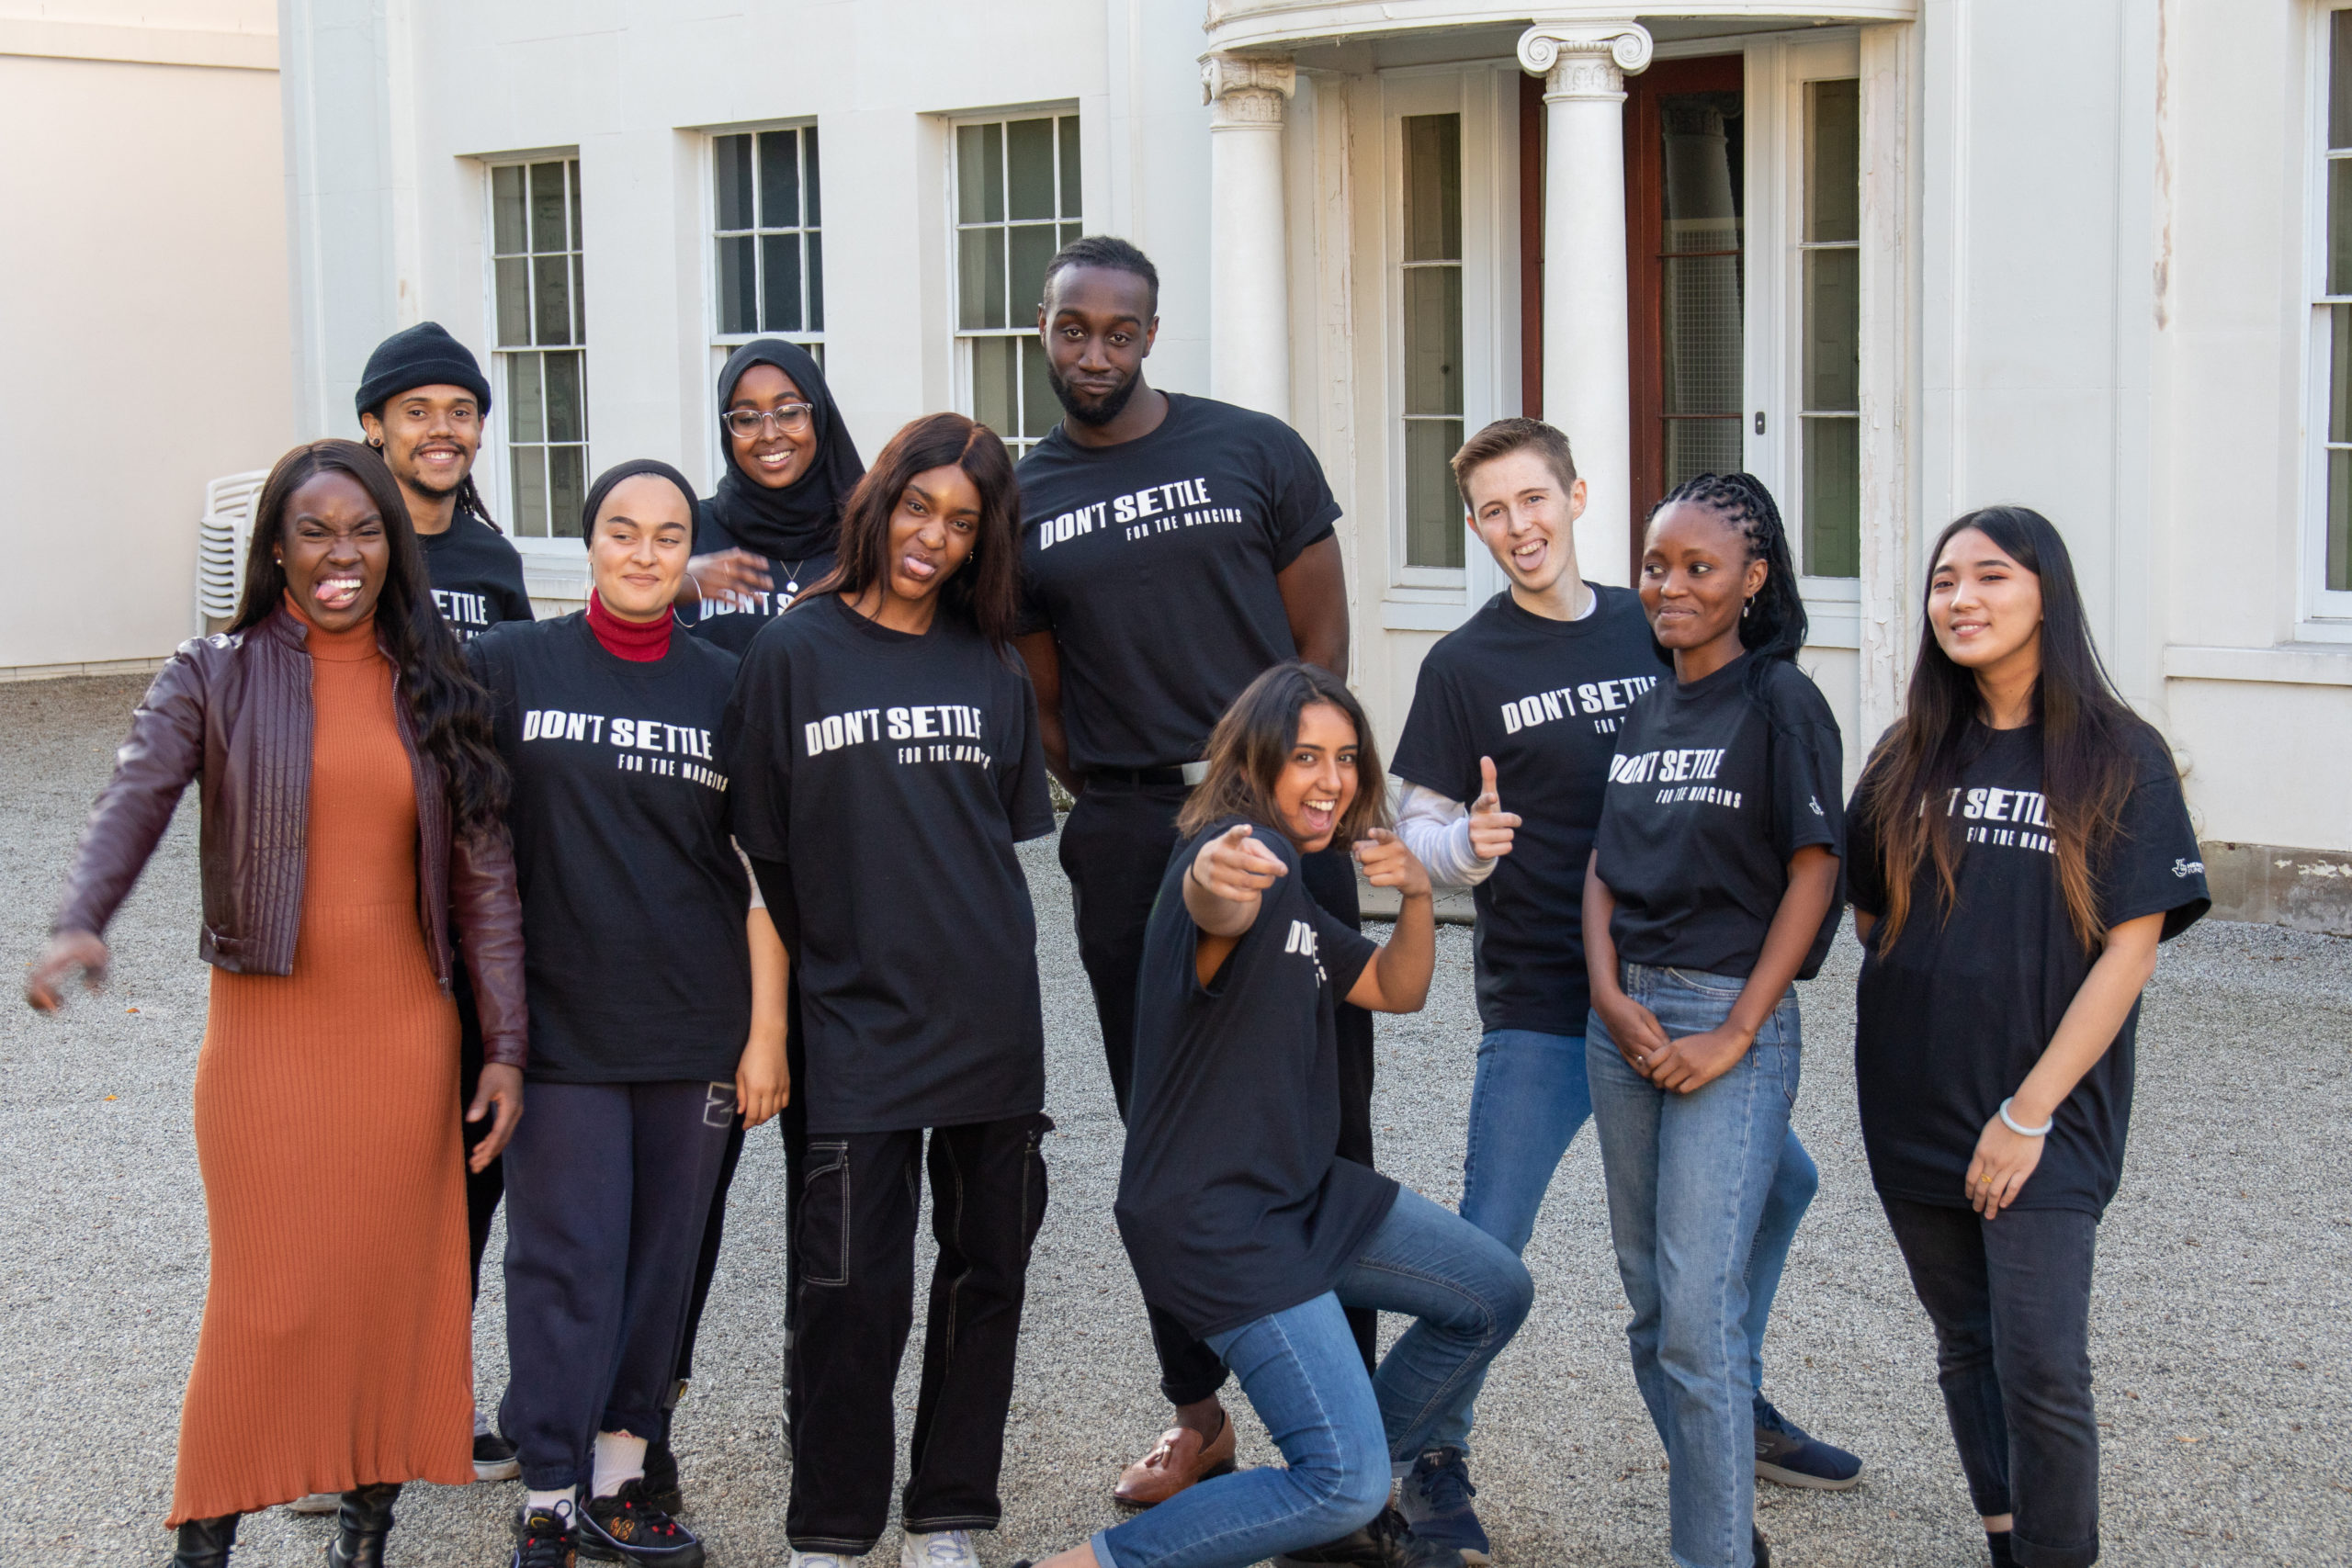 A group of young people wearing black t shirts reading Don't Settle in white text smiling and standing in front of a historic white building.